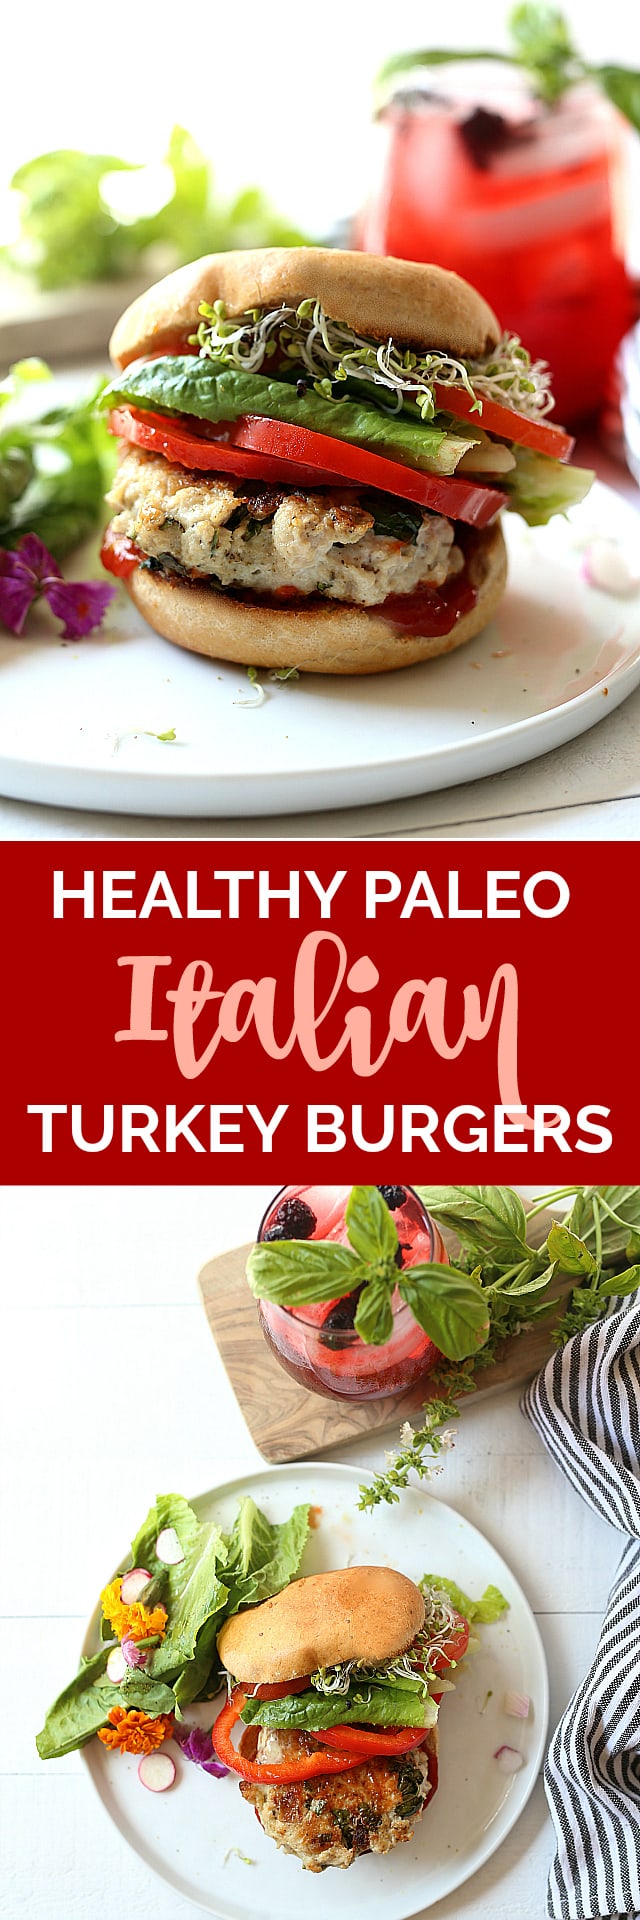 4-Ingredient healthy Italian turkey burger recipe sizzling with Italian flavors! Serve these ground turkey patties on a gluten-free bun with fresh red peppers and vegetables or over pasta with marinara sauce!